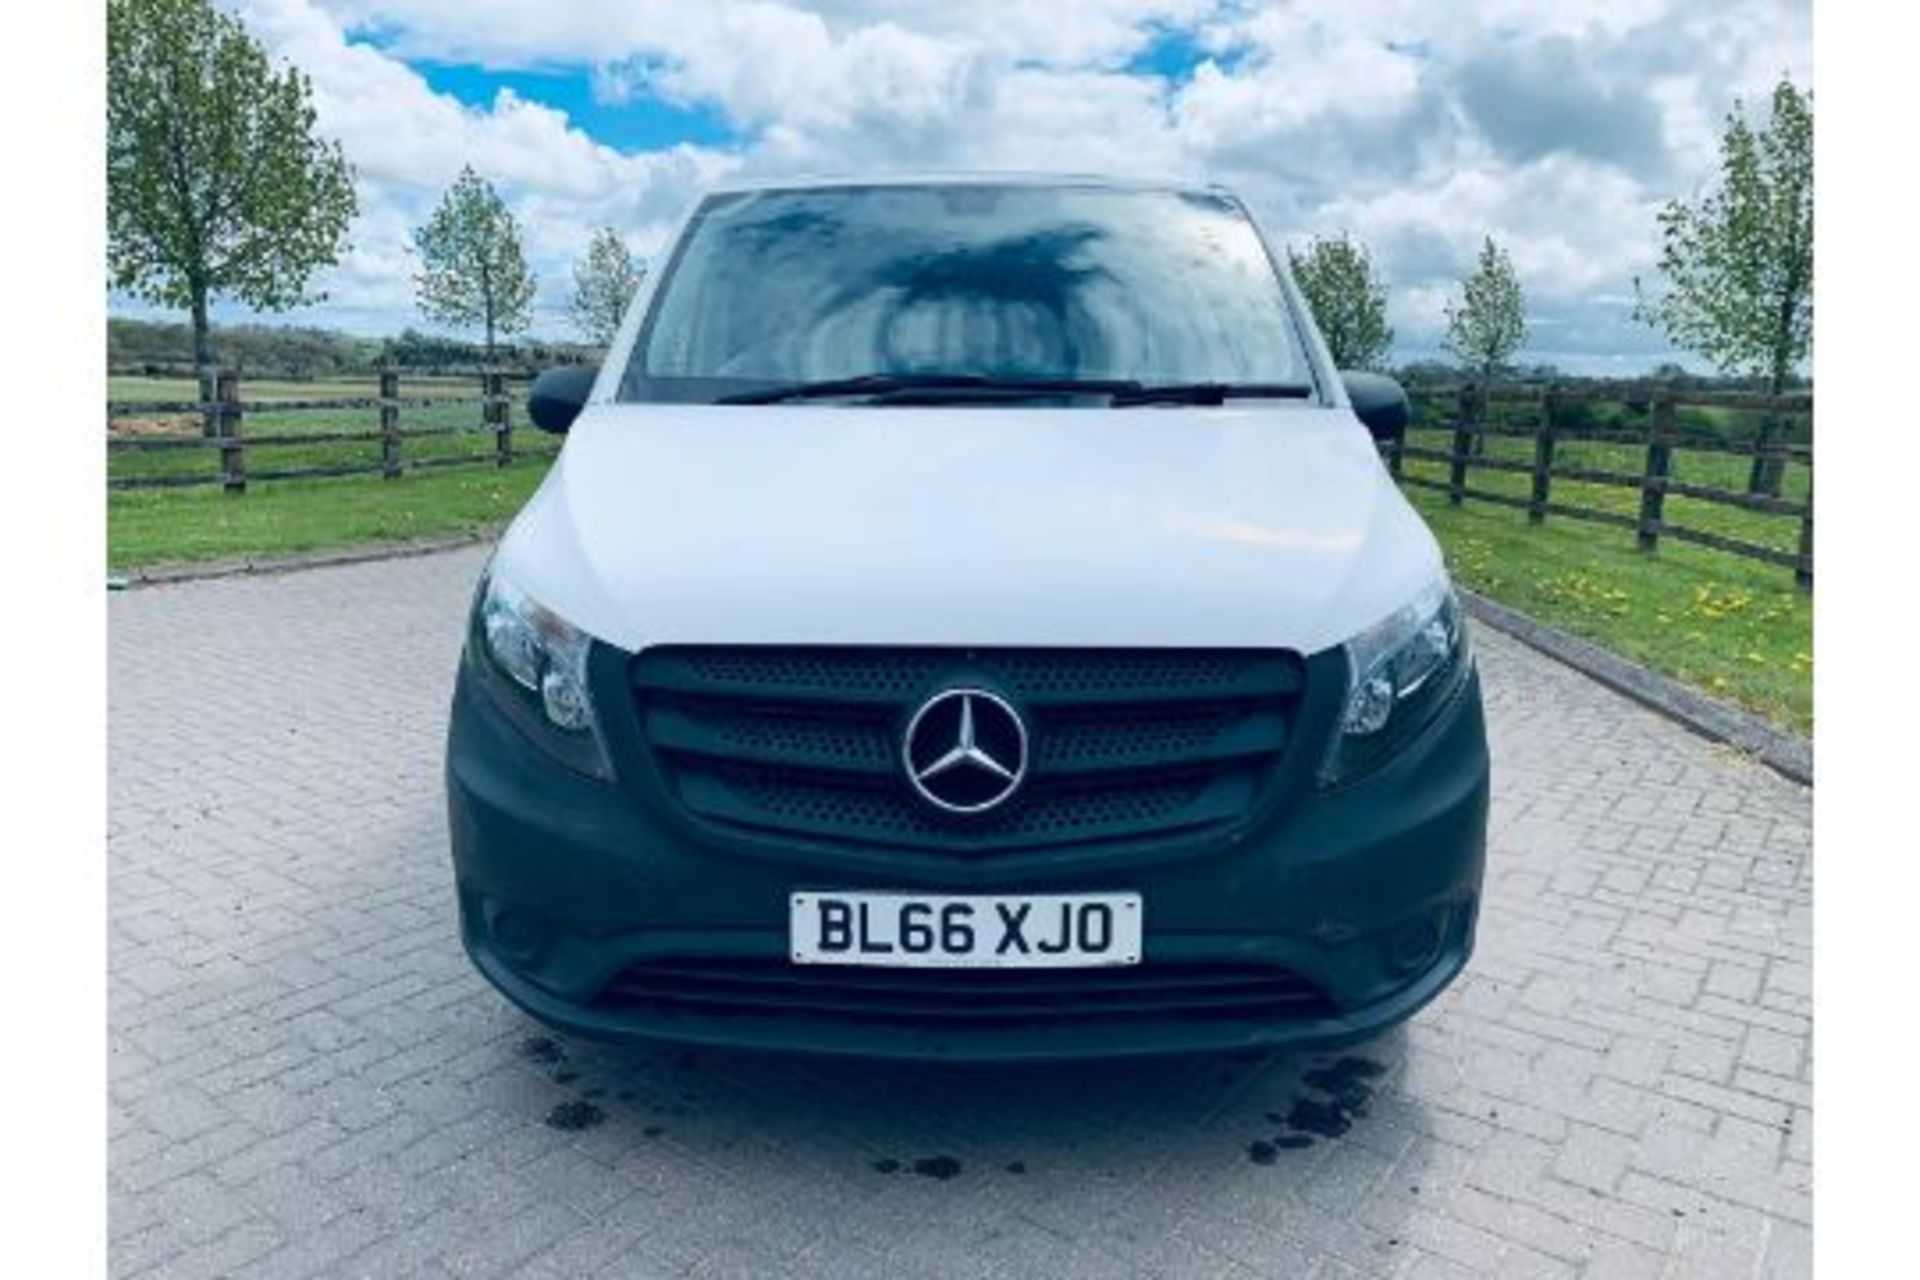 (RESERVE MET) Mercedes Vito CDI Lwb - 2017 Model -Euro 6 -Only 74k Miles -(New Shape) ULEZ Compliant - Image 6 of 15